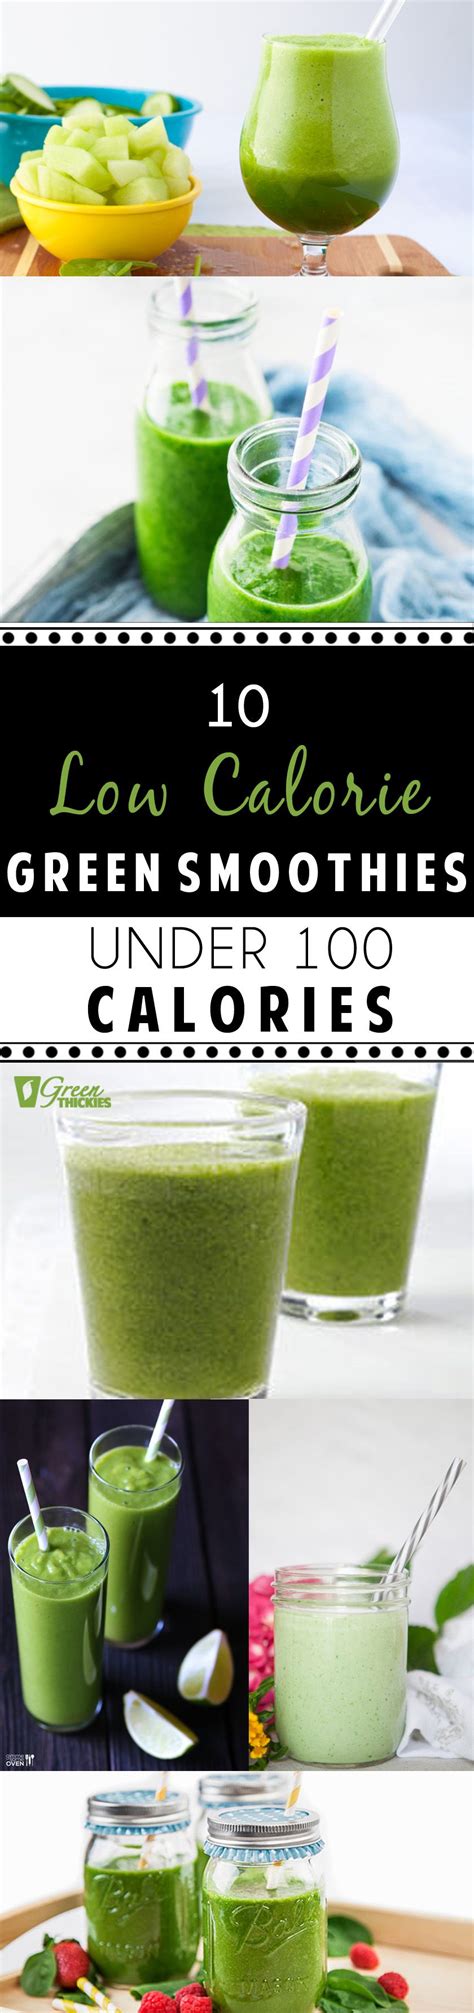 From beans on toast to overnight oats, we've got lots of delicious low calorie breakfast ideas for breakfast under 100 and breakfast 200 calories. 10 Low Calorie Green Smoothies Under 100 Calories | Under 100 calories, Healthy green smoothies ...